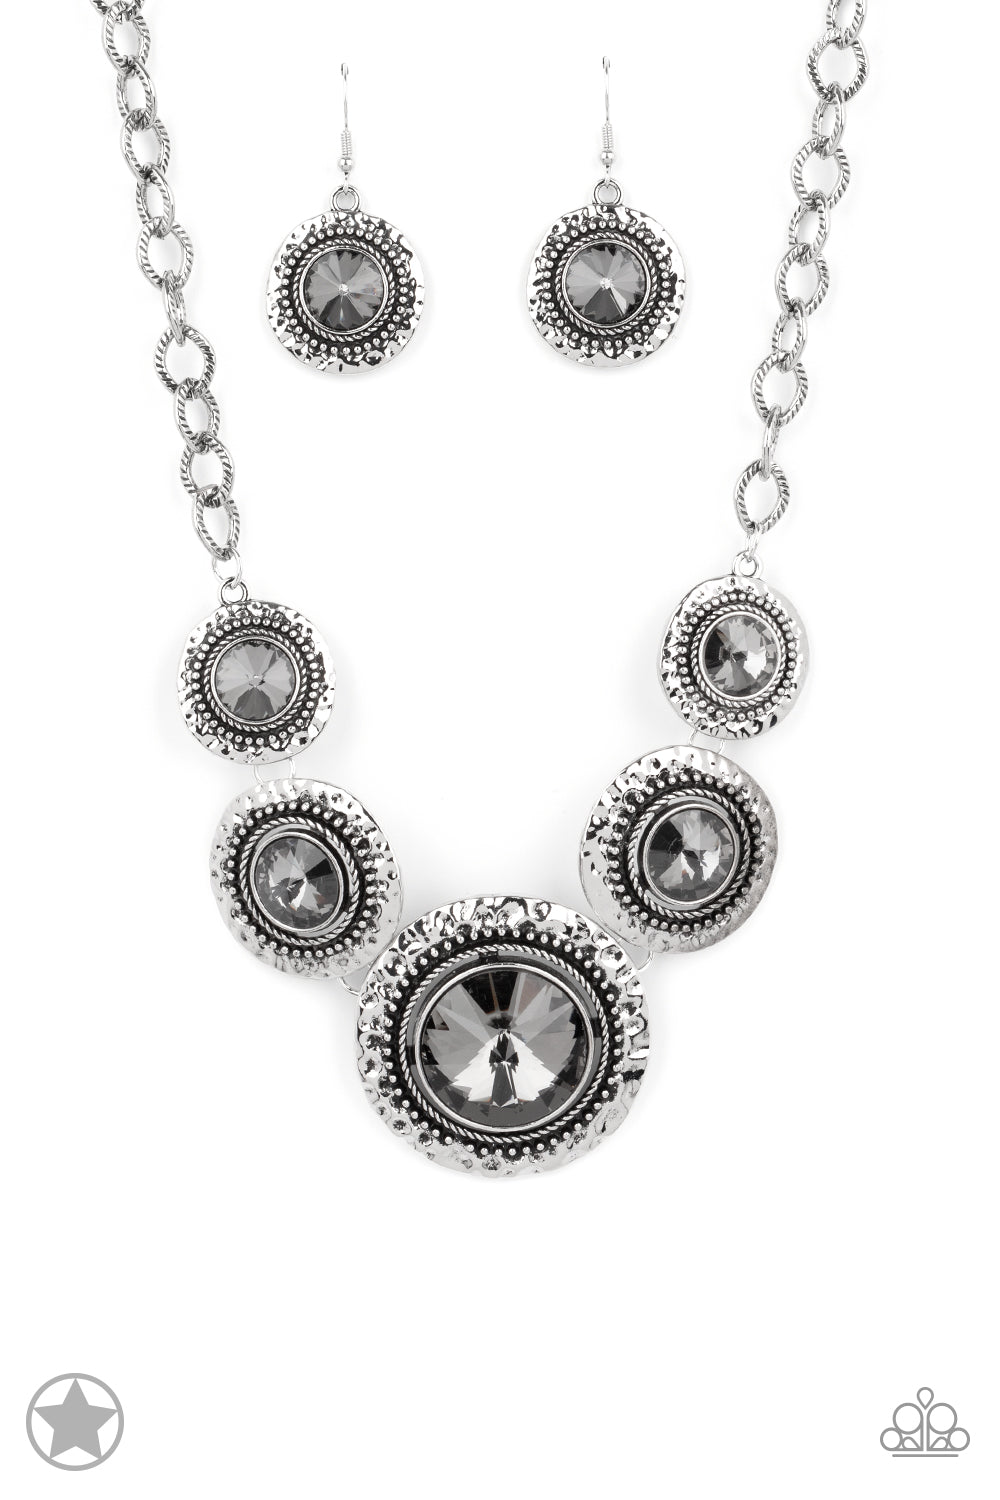 Gradually increasing in size, dramatically oversized smoky gems are pressed into the centers of hammered and silver studded frames. The blinding frames link below the collar for a glamorous, statement-making finish. Features an adjustable clasp closure.  Sold as one individual necklace. Includes one pair of matching earrings